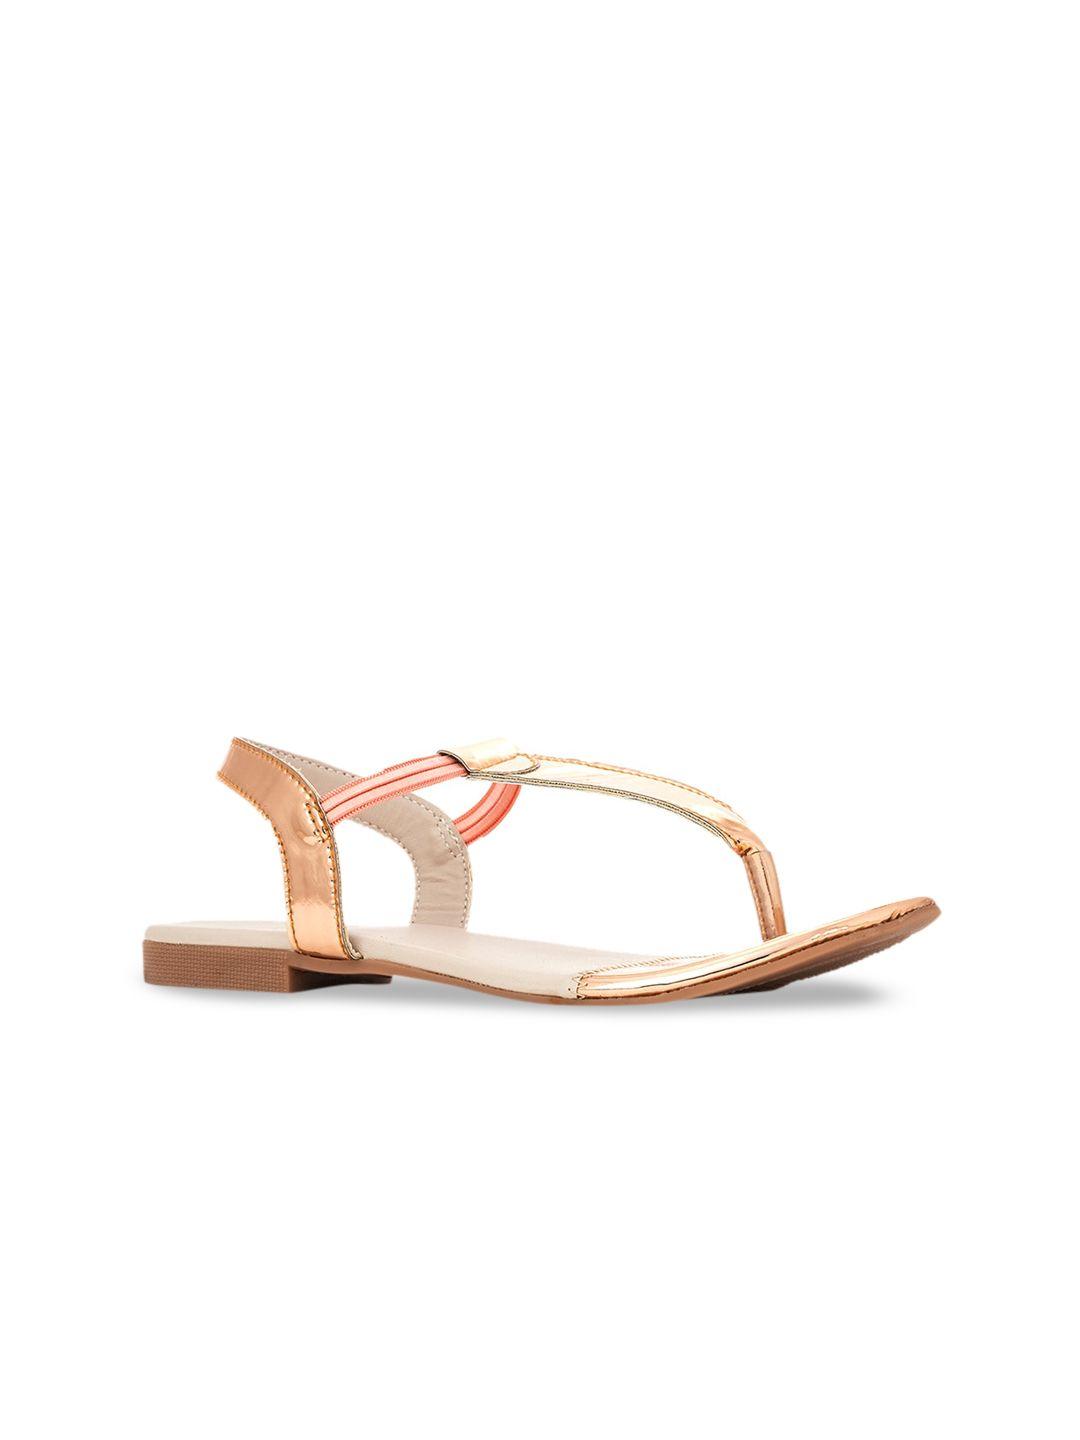 khadims-women-rose-gold-open-toe-flats-with-bows